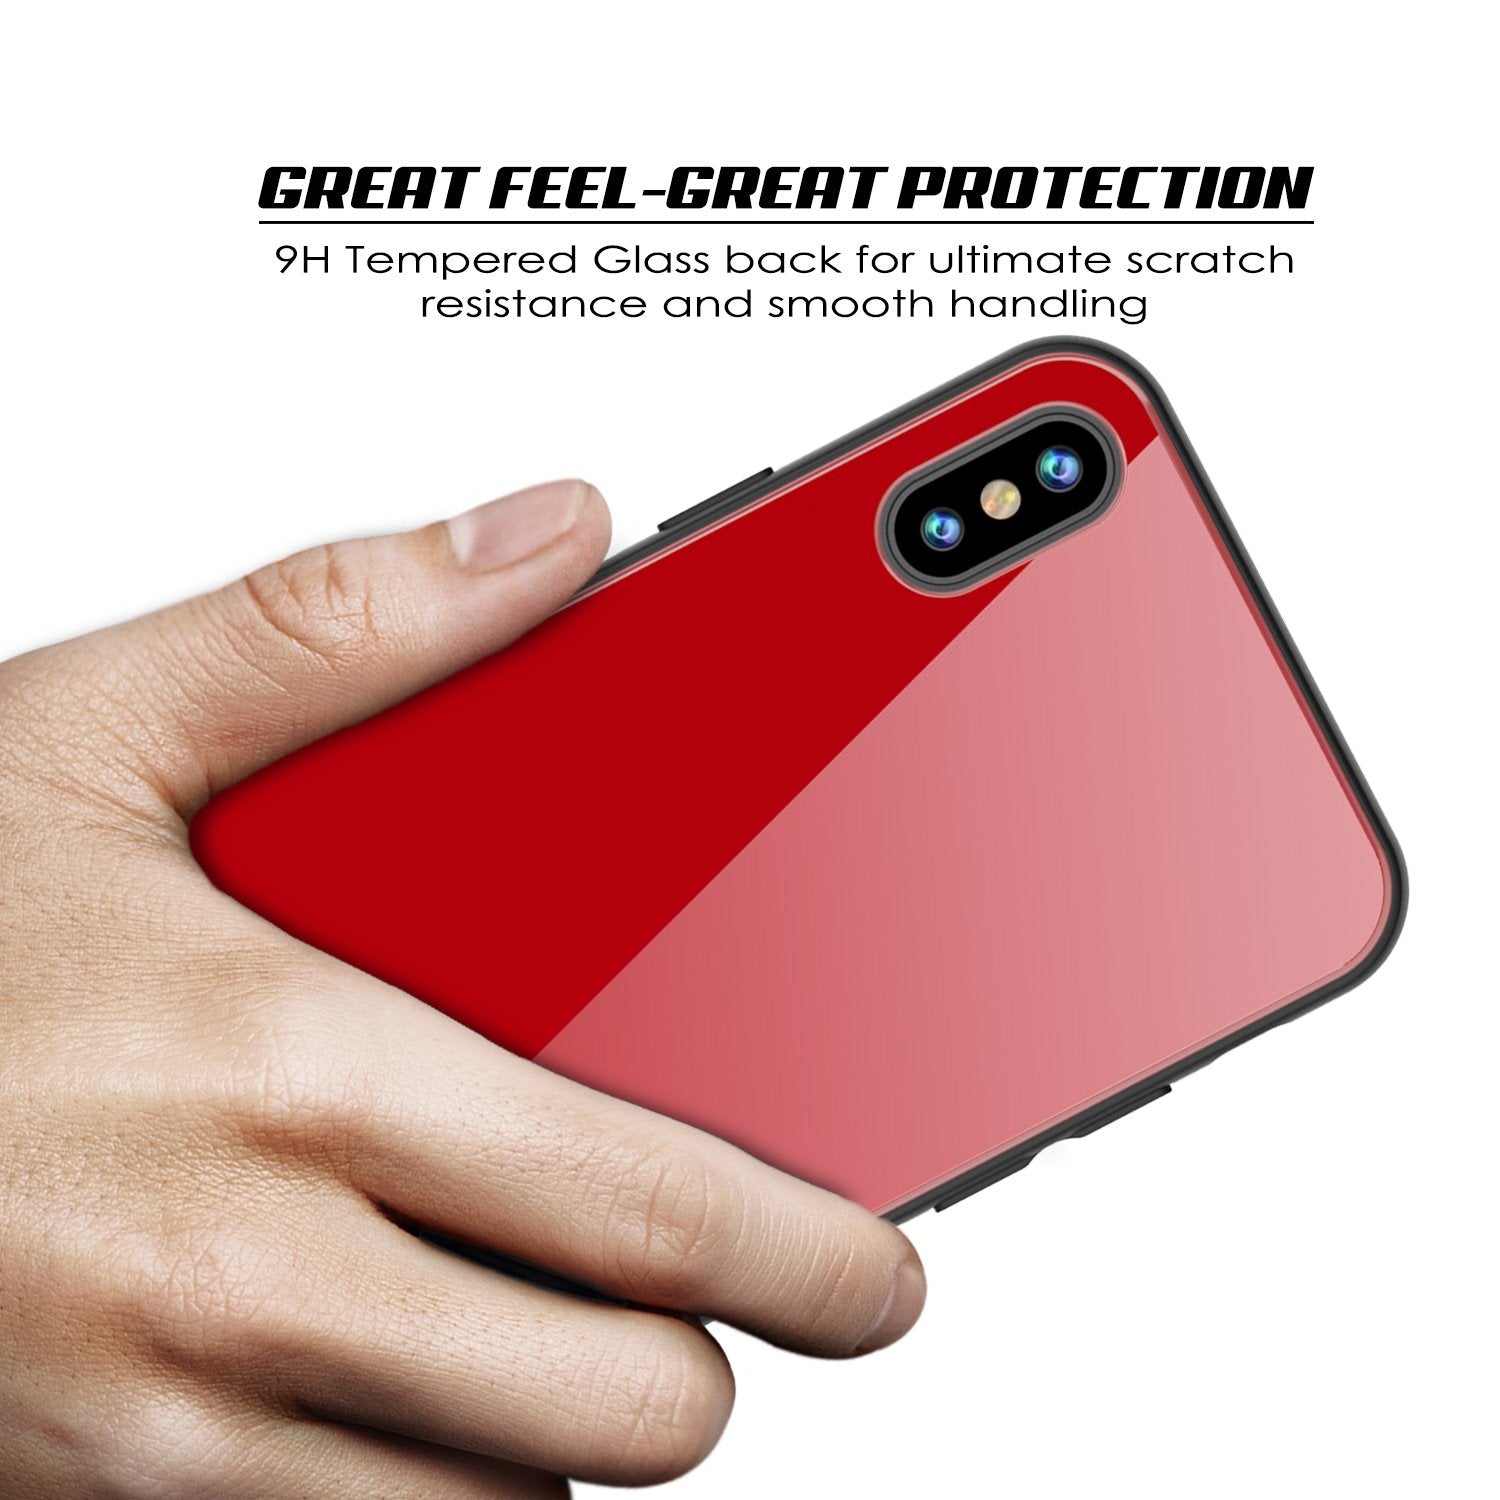 iPhone X Case, Punkcase GlassShield Ultra Thin Protective 9H Full Body Tempered Glass Cover W/ Drop Protection & Non Slip Grip for Apple iPhone 10 [Red]